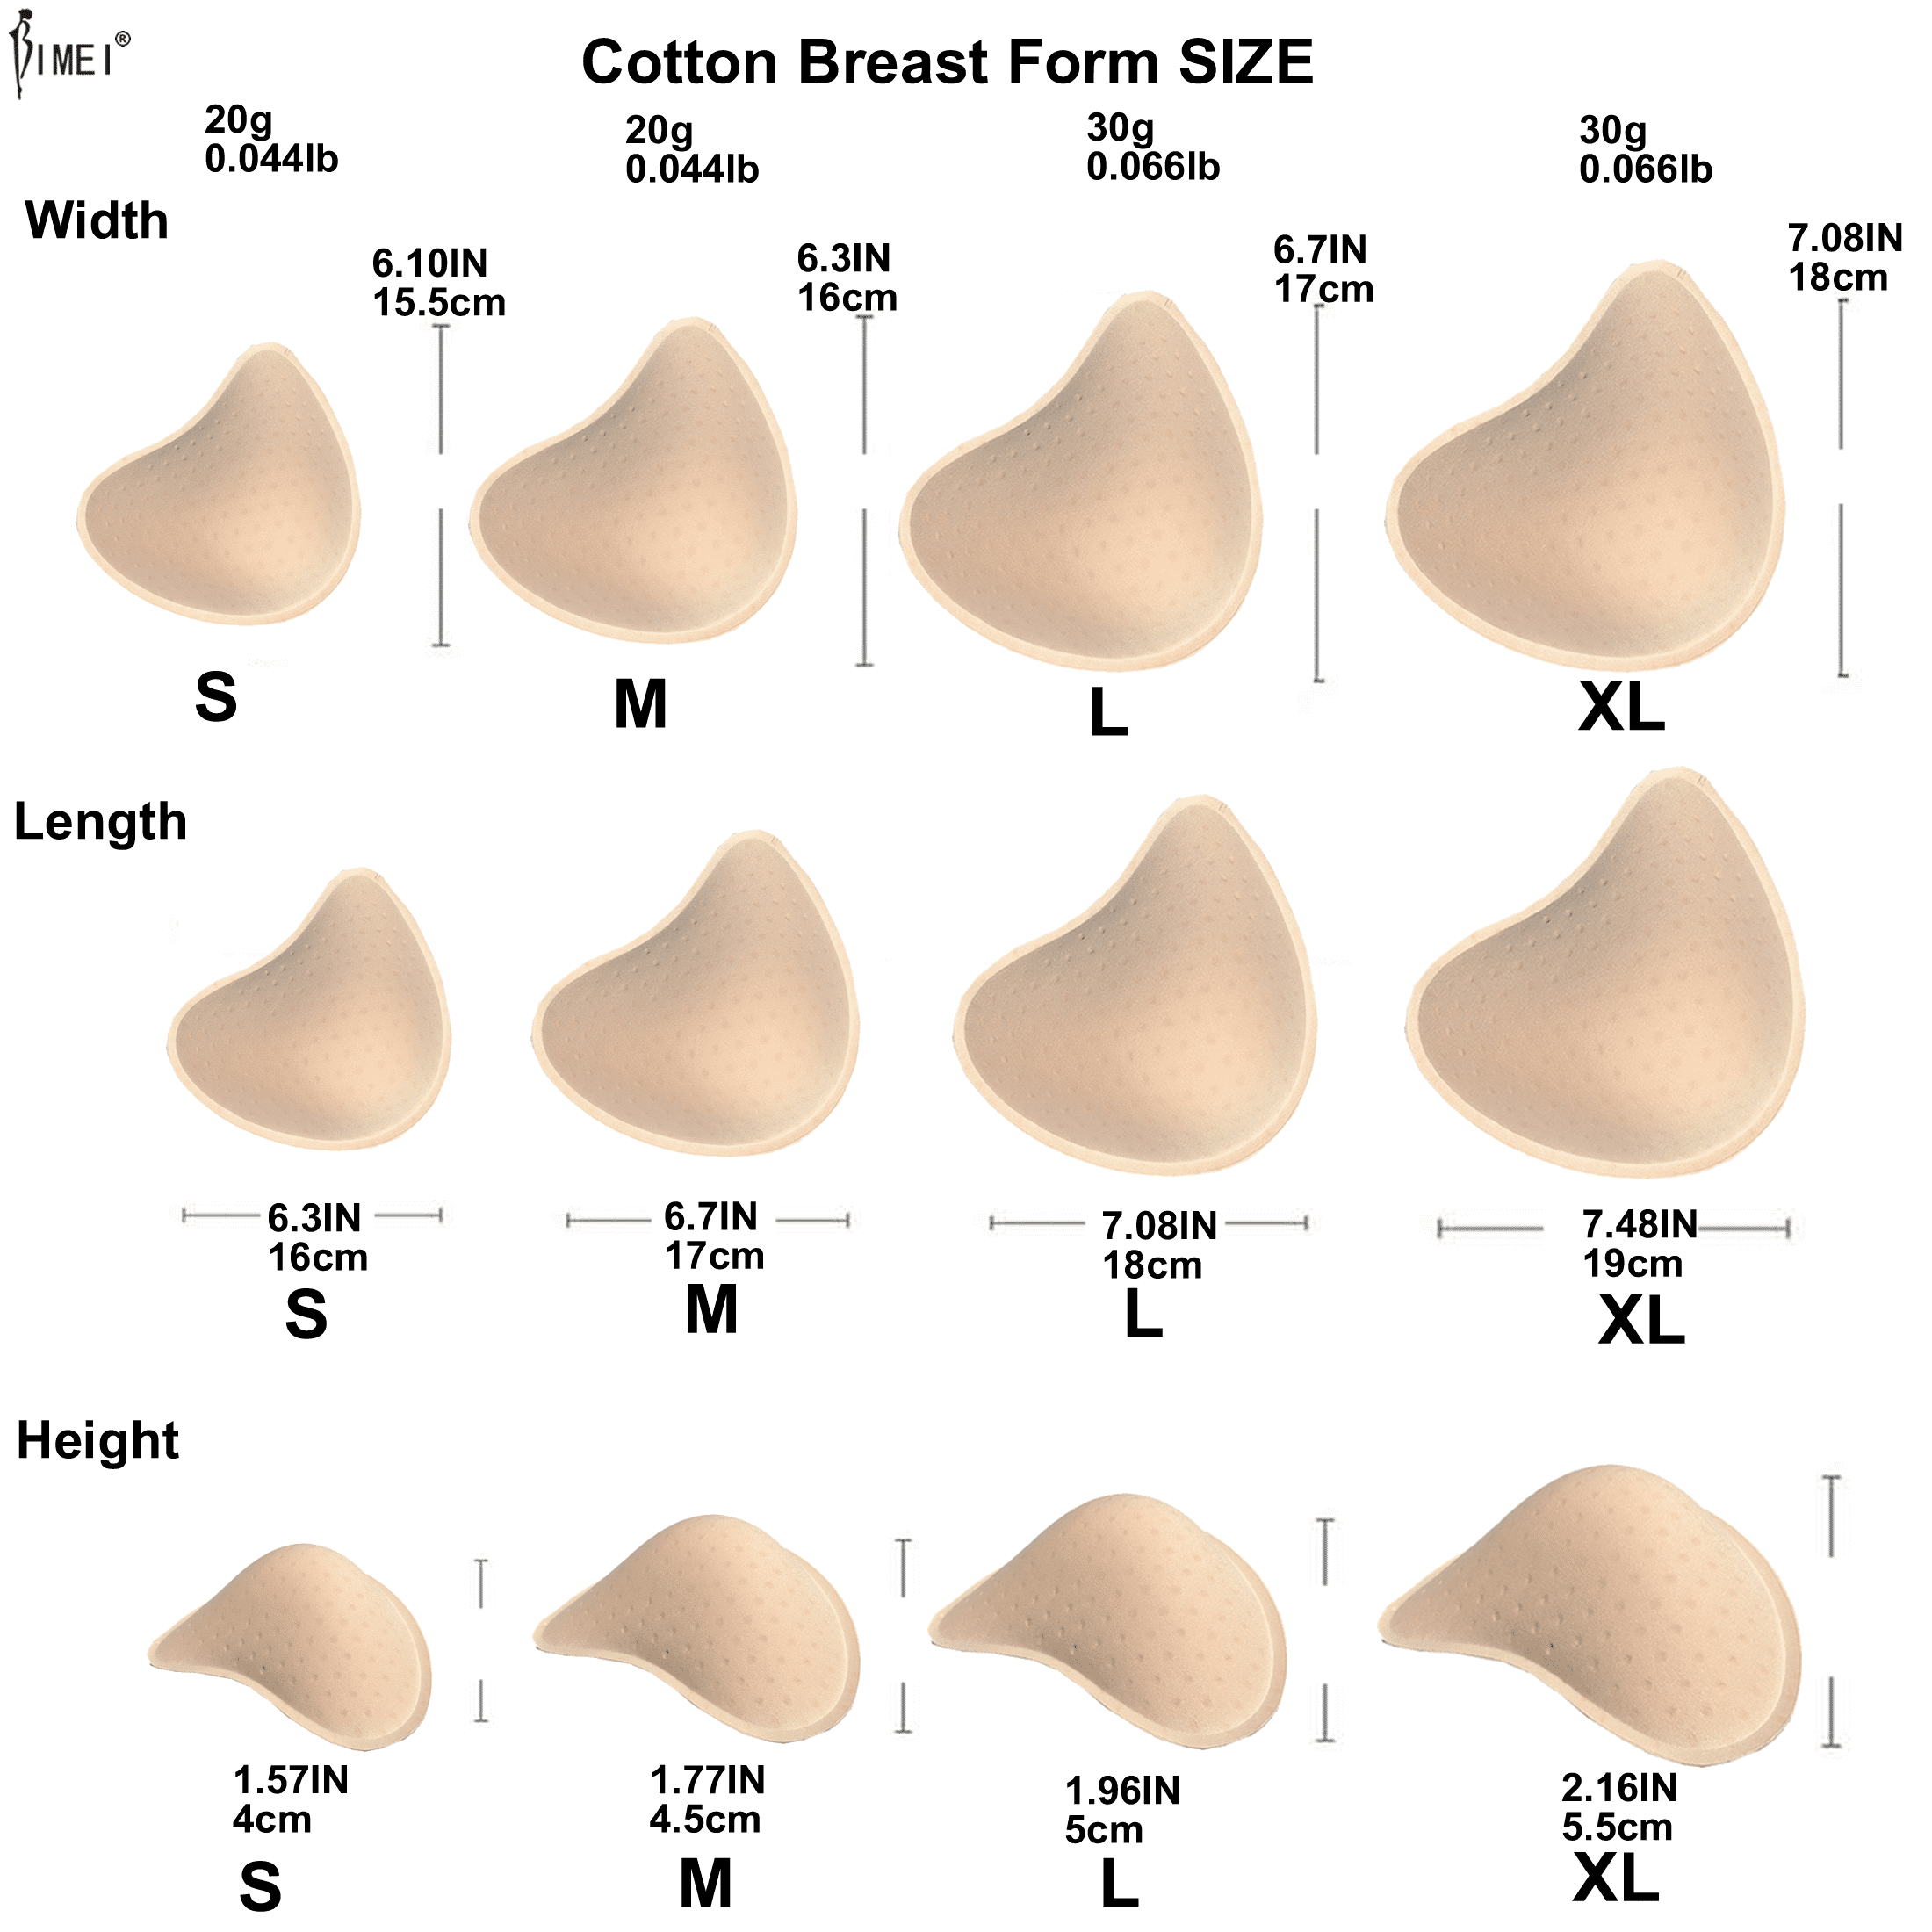 BIMEI Cotton Breast Forms Breast Prosthesis Mastectomy Bra Insert Pads Light -weight Ventilation Sponge Boobs for Women Mastectomy Breast Cancer Support  #3,Holey Spiral,1 Piece,Left,S 